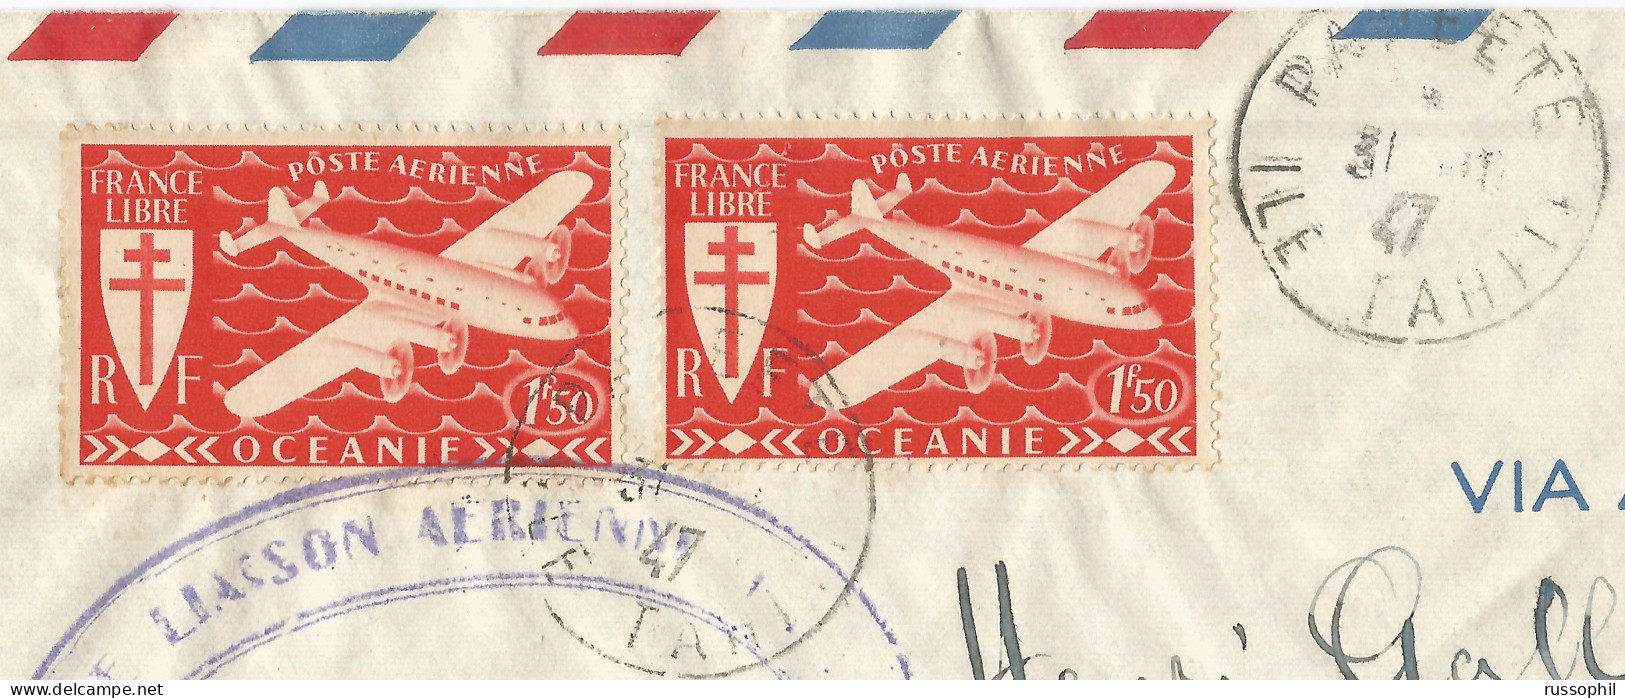 OCEANIE -  TRAPAS - 3 FR. FRANKING ON AIR COVER FROM PAPEETE TO NEW CALEDONIA - RETURNED TO SENDER - 1947 - Briefe U. Dokumente